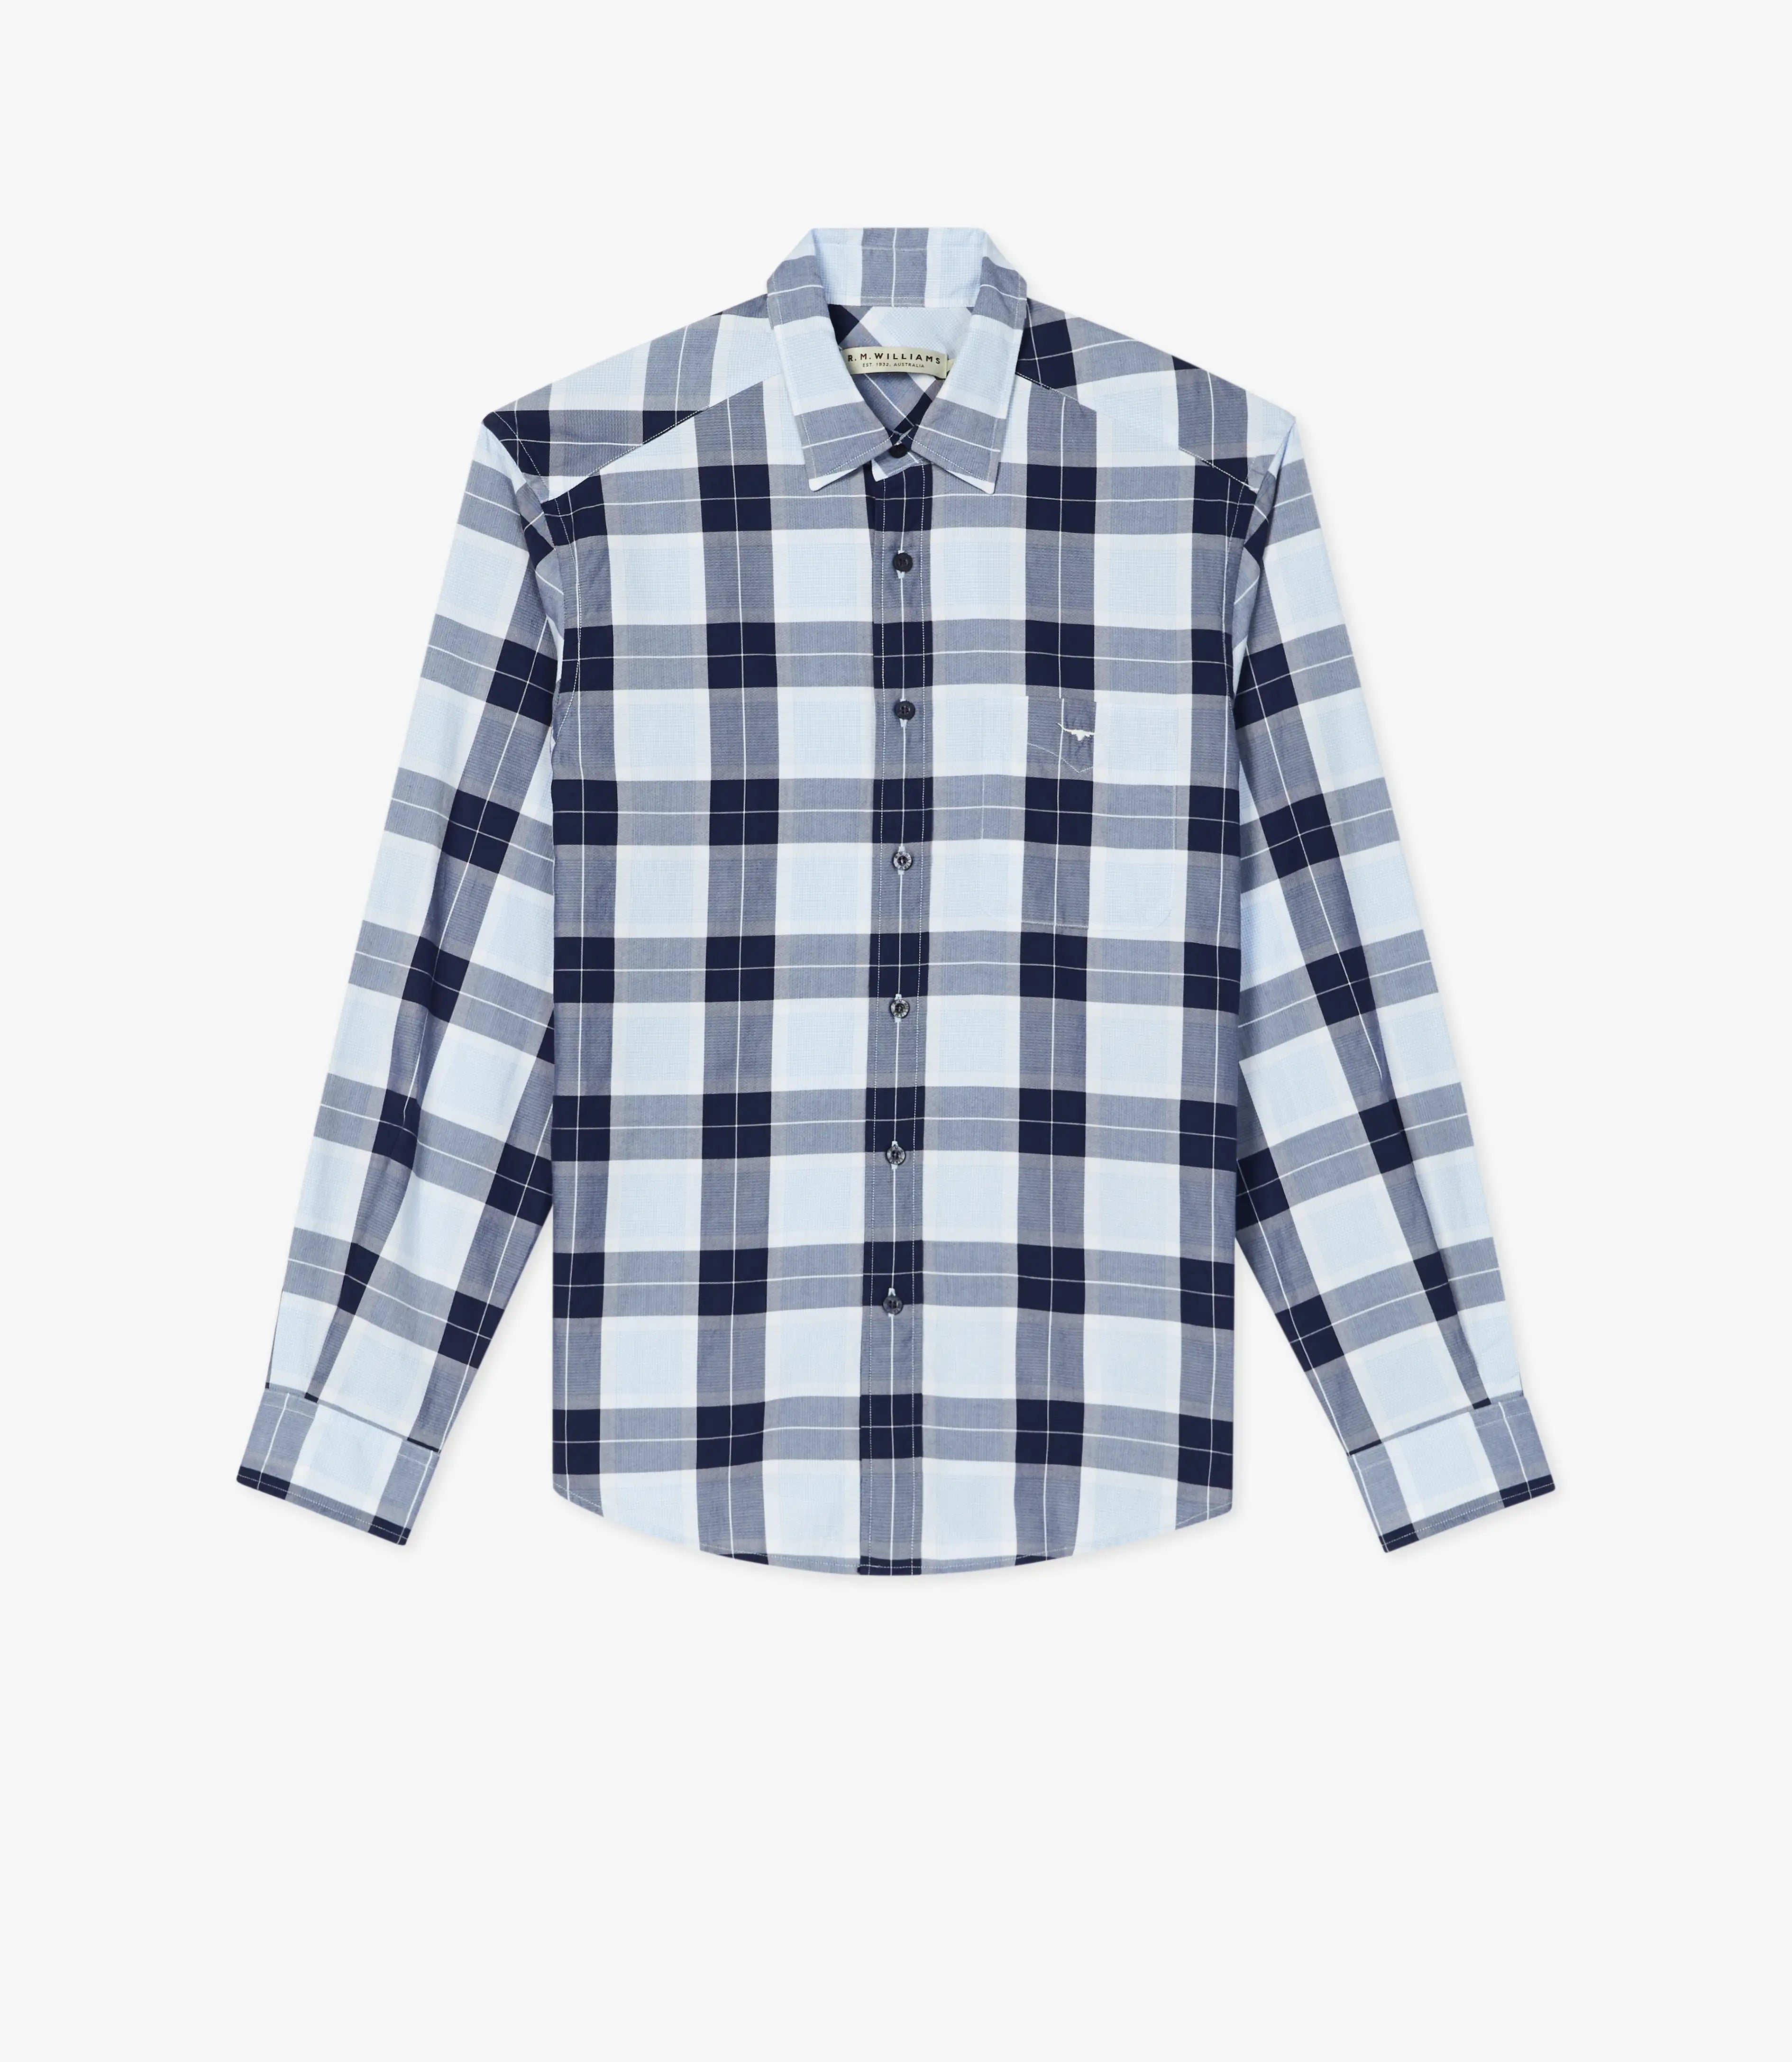 RMWilliams Collins Shirt in Blue, Navy & White